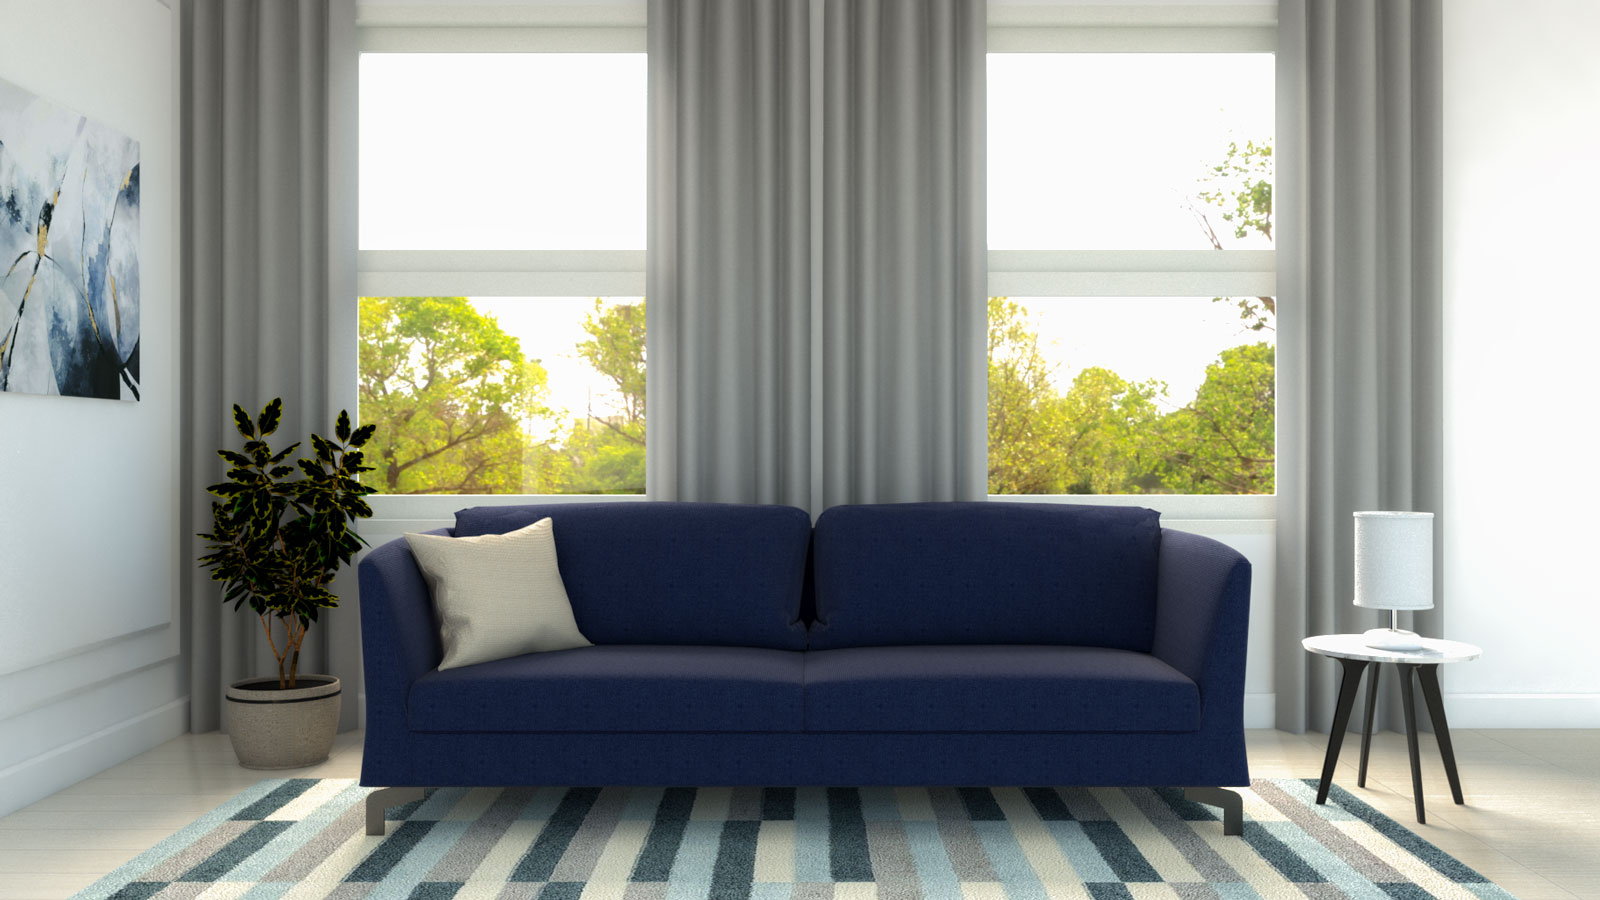 What Color Curtains Go With Blue Couch, What Colors Go With Royal Blue Sofa